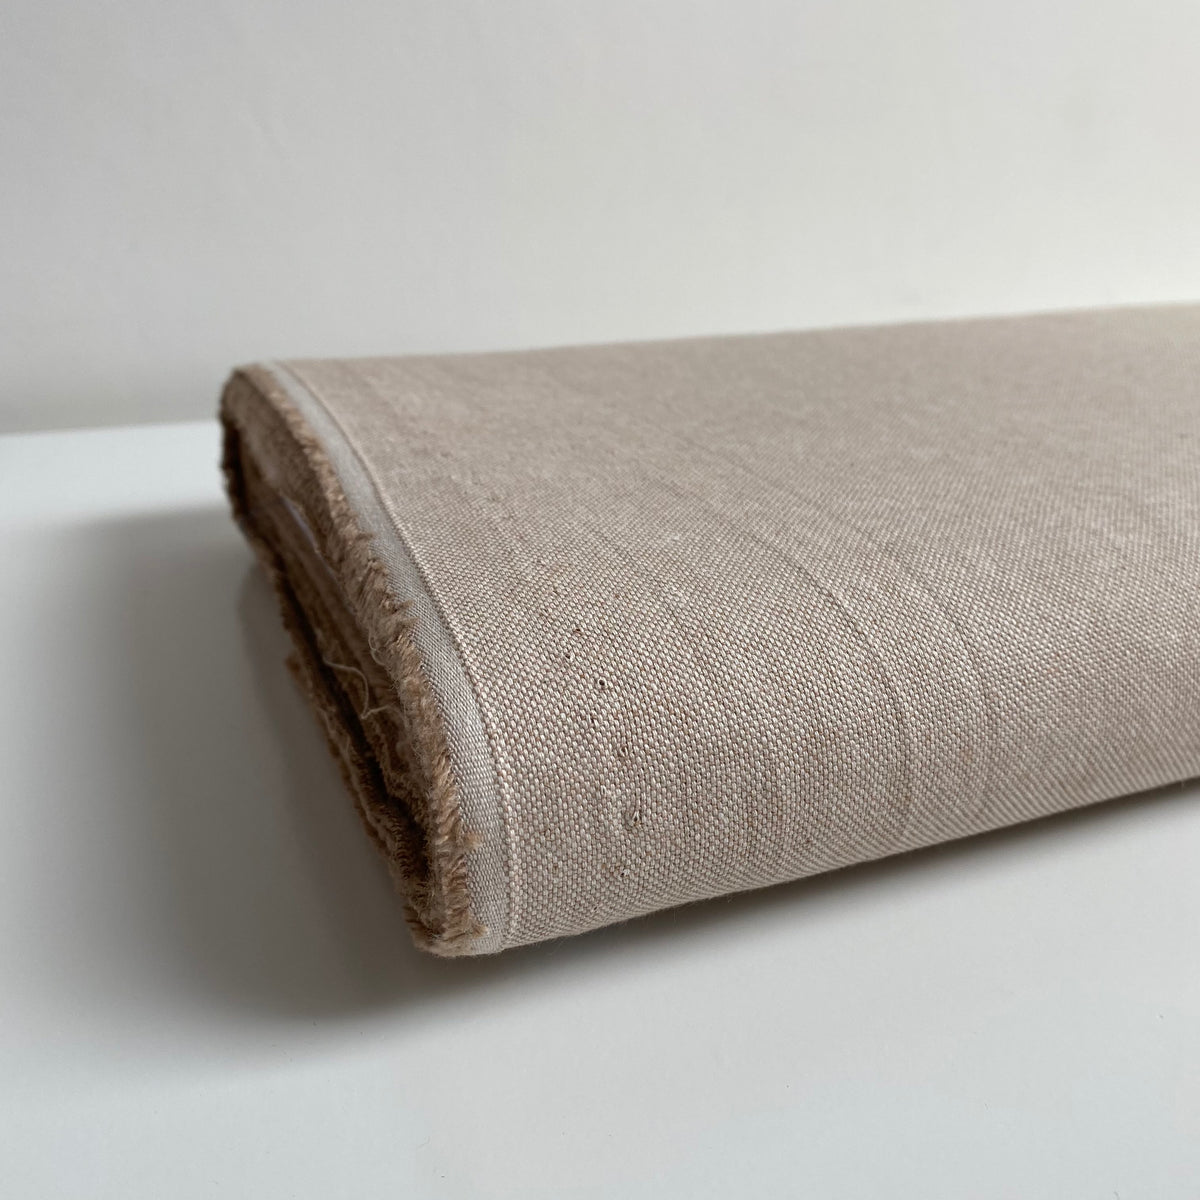 Recycled Canvas Fabric - Stone Beige - Priced per 0.5 metre